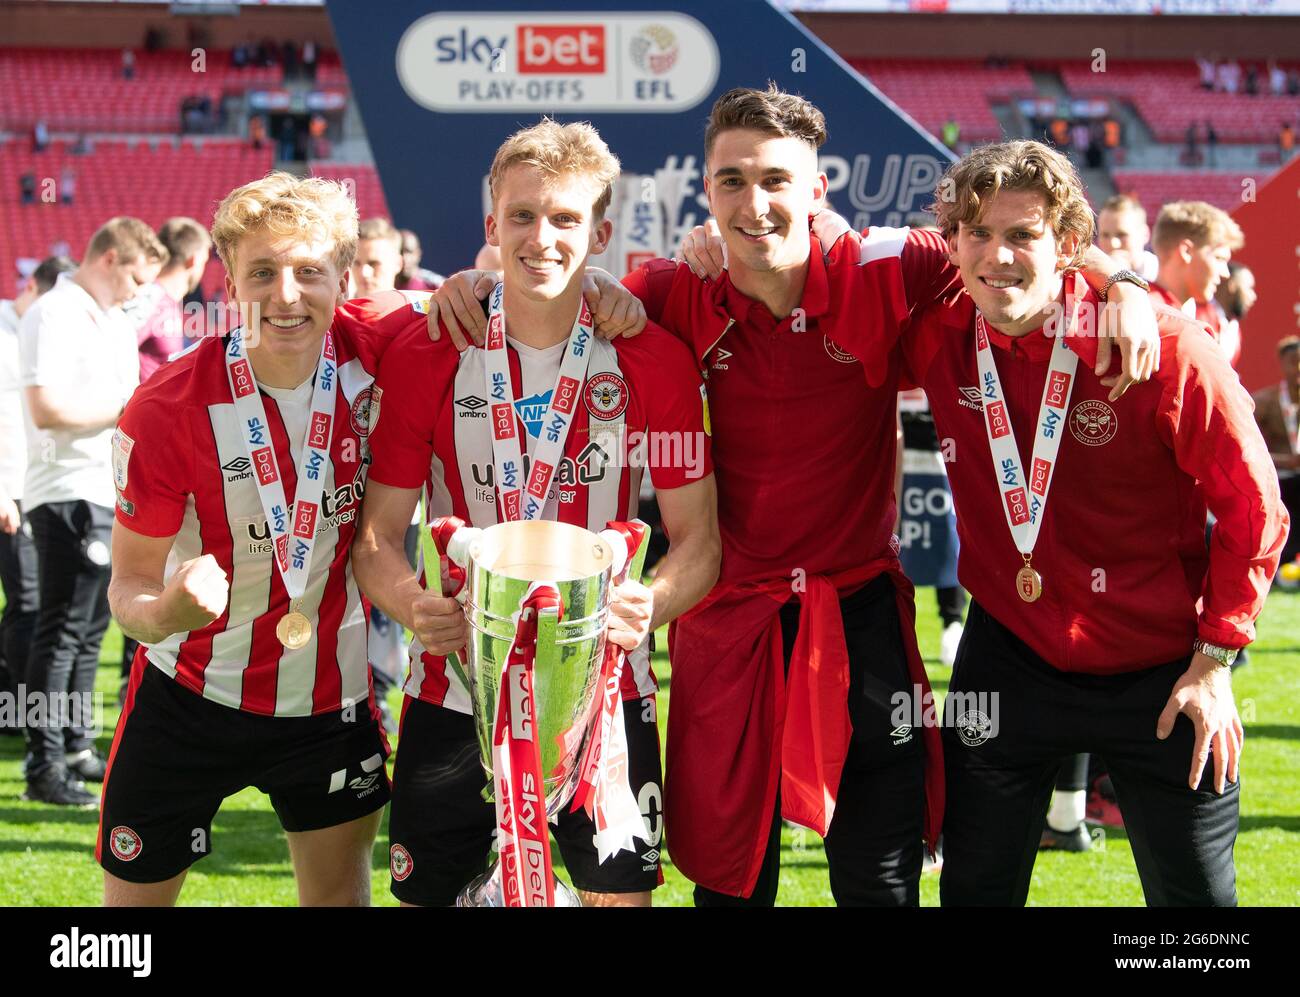 London, UK. 29th May, 2021. From left to right: Brentford Mads Bidstrup; Brentford Mads Roerslev Rasmussen; Brentford Julian Jeanvier and Brentford Mads Bech Sorensen after the Sky Bet Championship play-off Final match between Brentford and Swansea City at Wembley Stadium, London, England on 29 May 2021. Photo by Andrew Aleksiejczuk/PRiME Media Images. Credit: PRiME Media Images/Alamy Live News Stock Photo